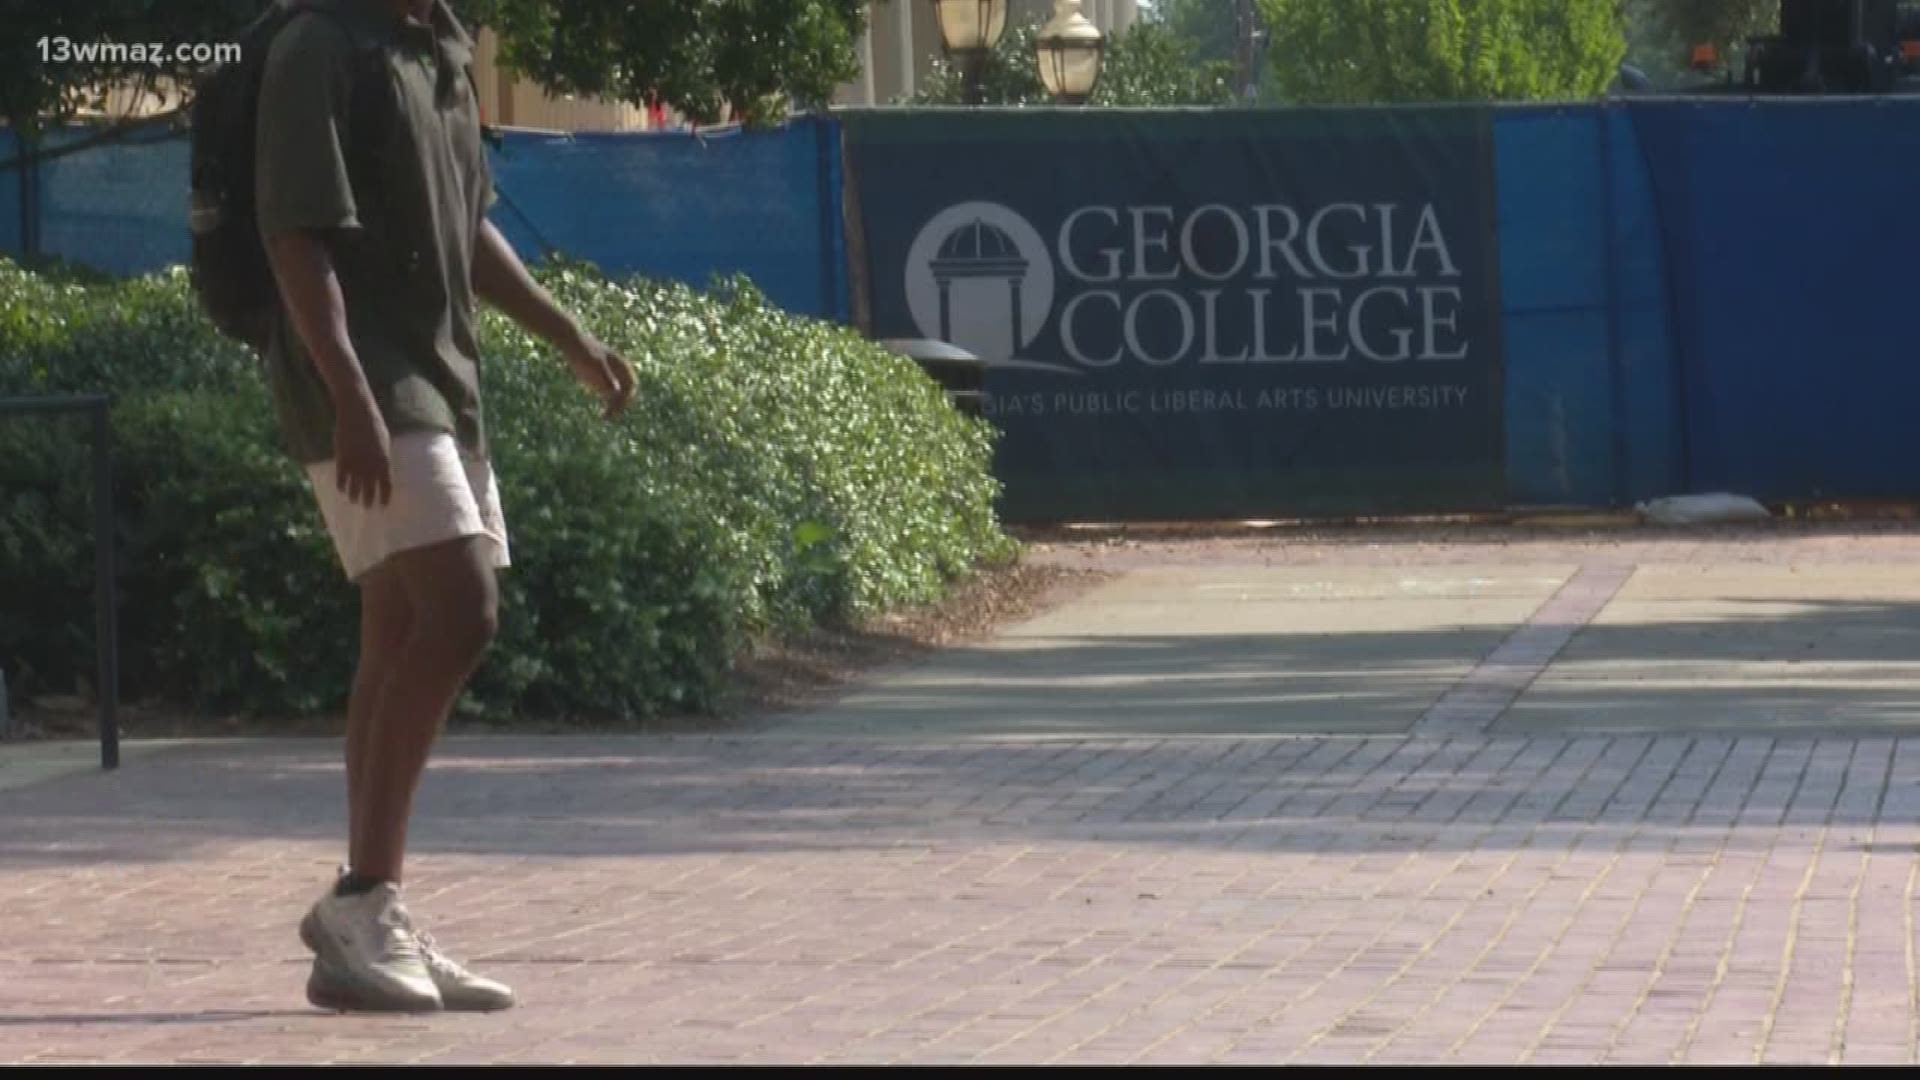 If you work or go to Georgia College, this story might make you smile. The school is being recognized by US News and World Report as one of the best colleges in the country.